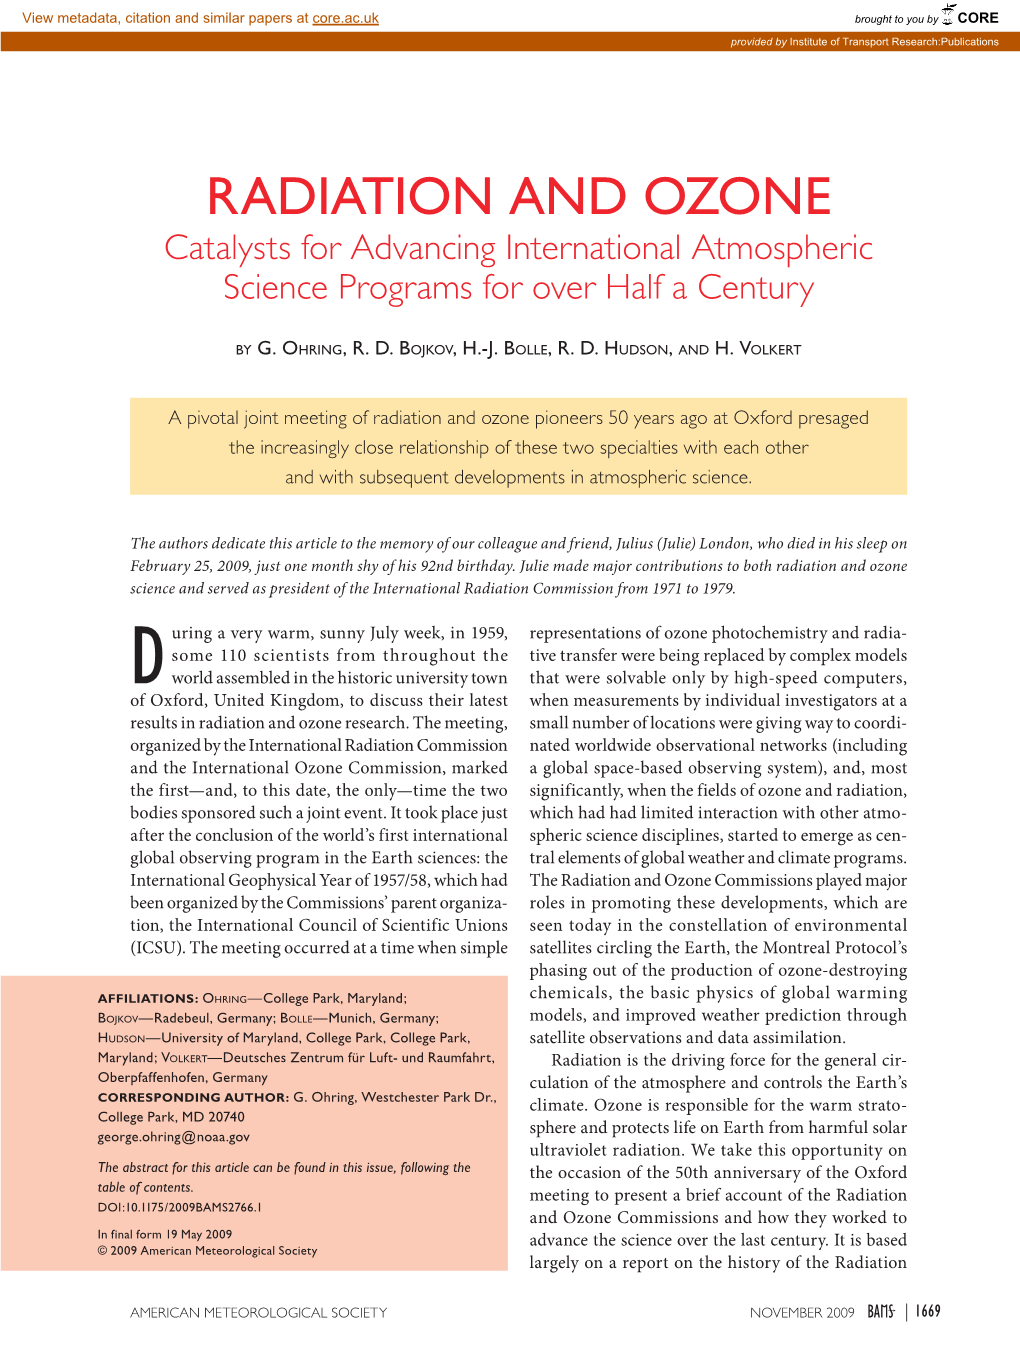 RADIATION and OZONE Catalysts for Advancing International Atmospheric Science Programs for Over Half a Century